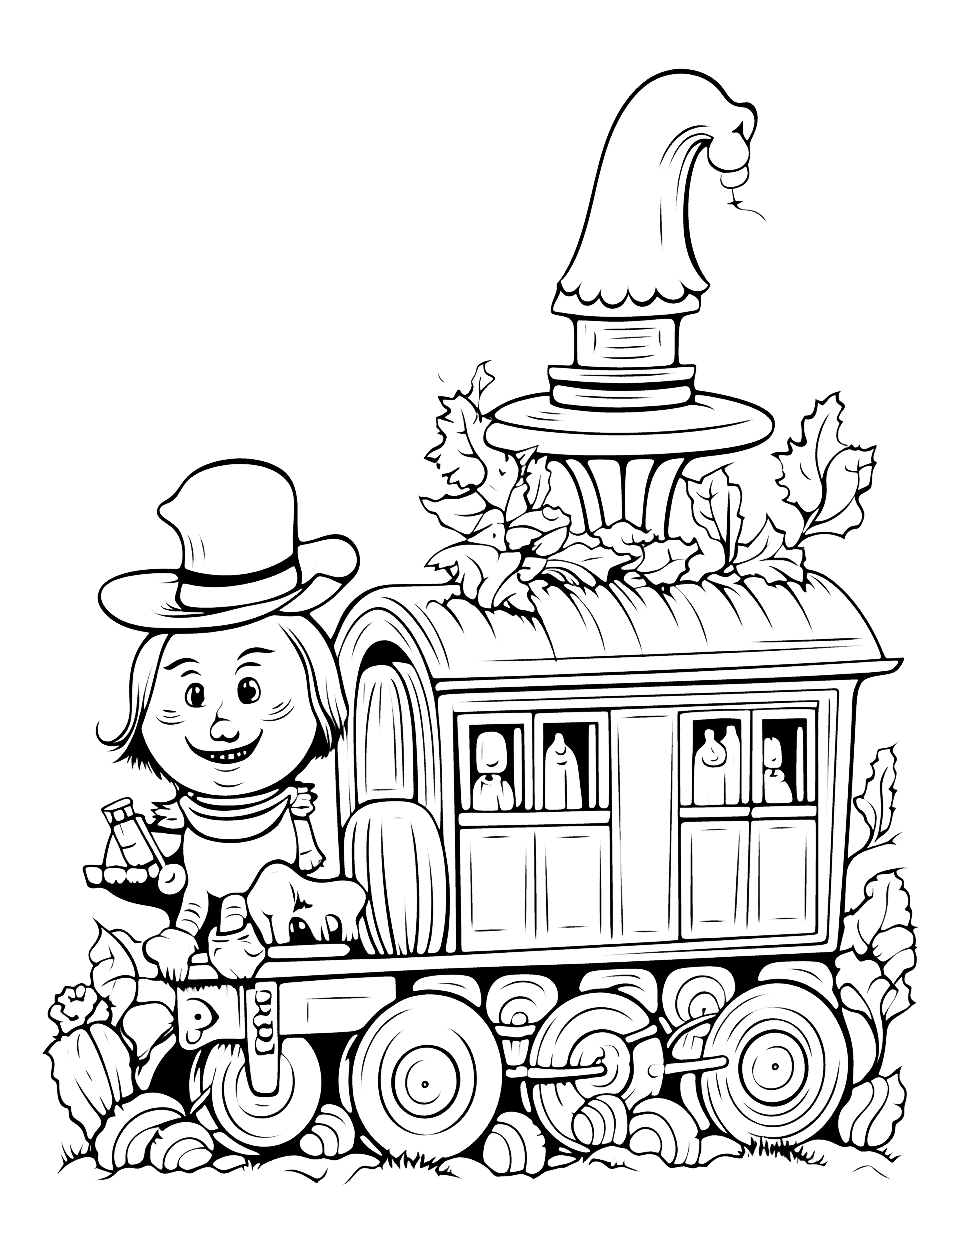 Ghost Train Halloween Coloring Page - A spectral locomotive, complete with ghostly passengers and a phantom conductor.